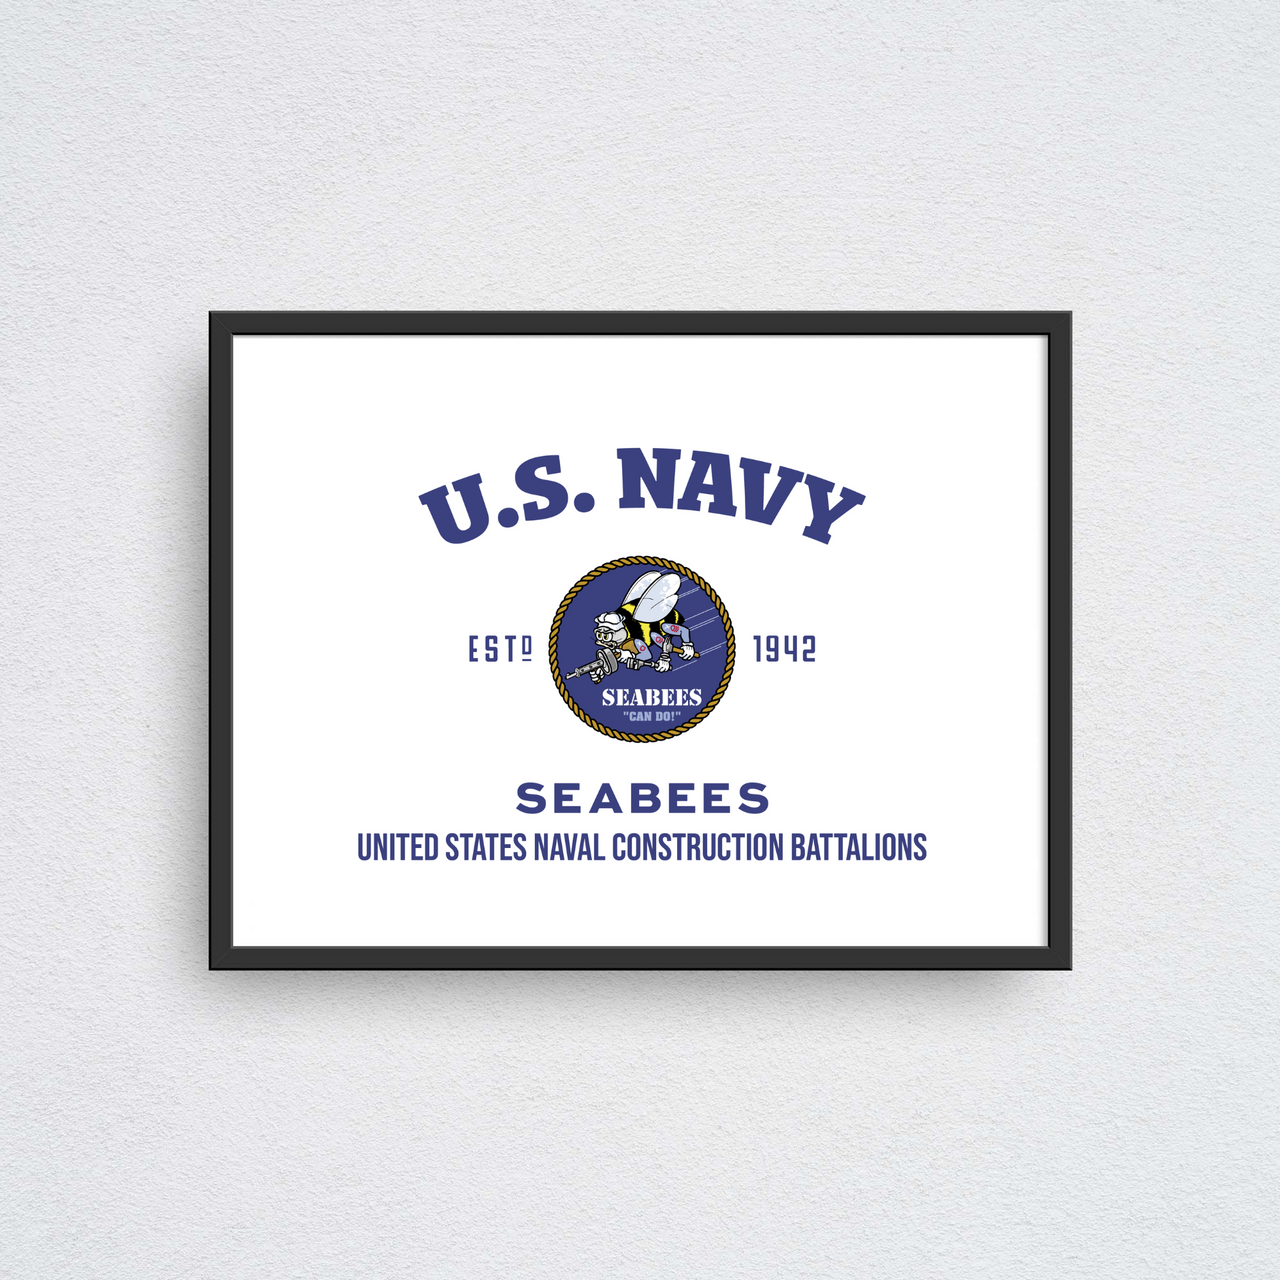 Seabees 'Go Now' Patch